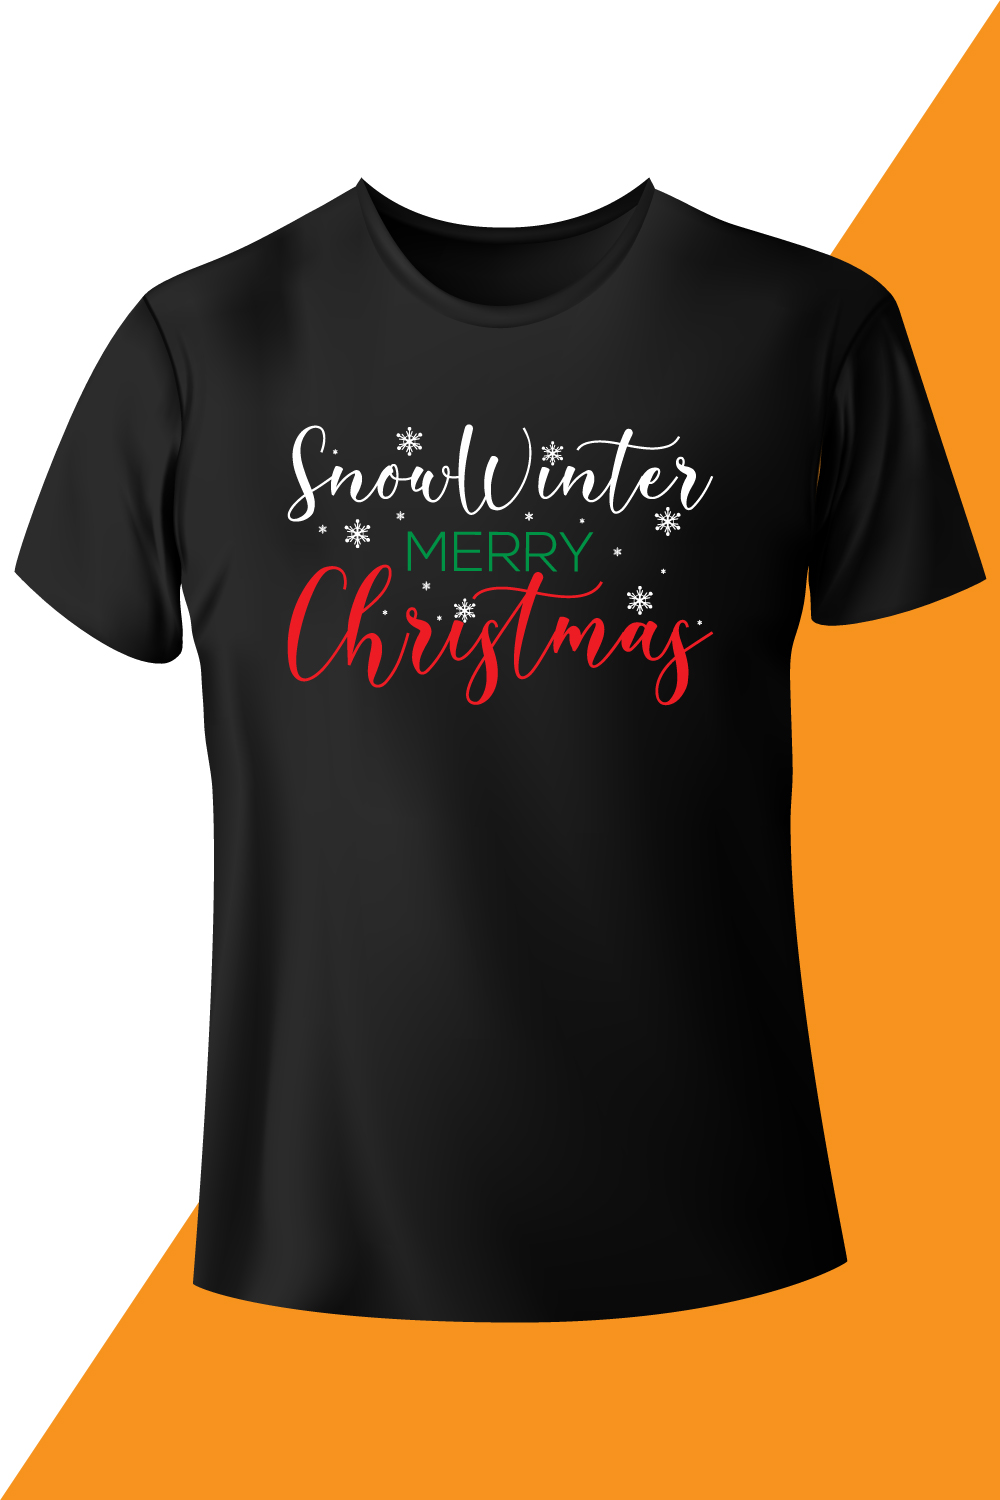 Image of black T-shirt with irresistible print snow winter merry christmas.